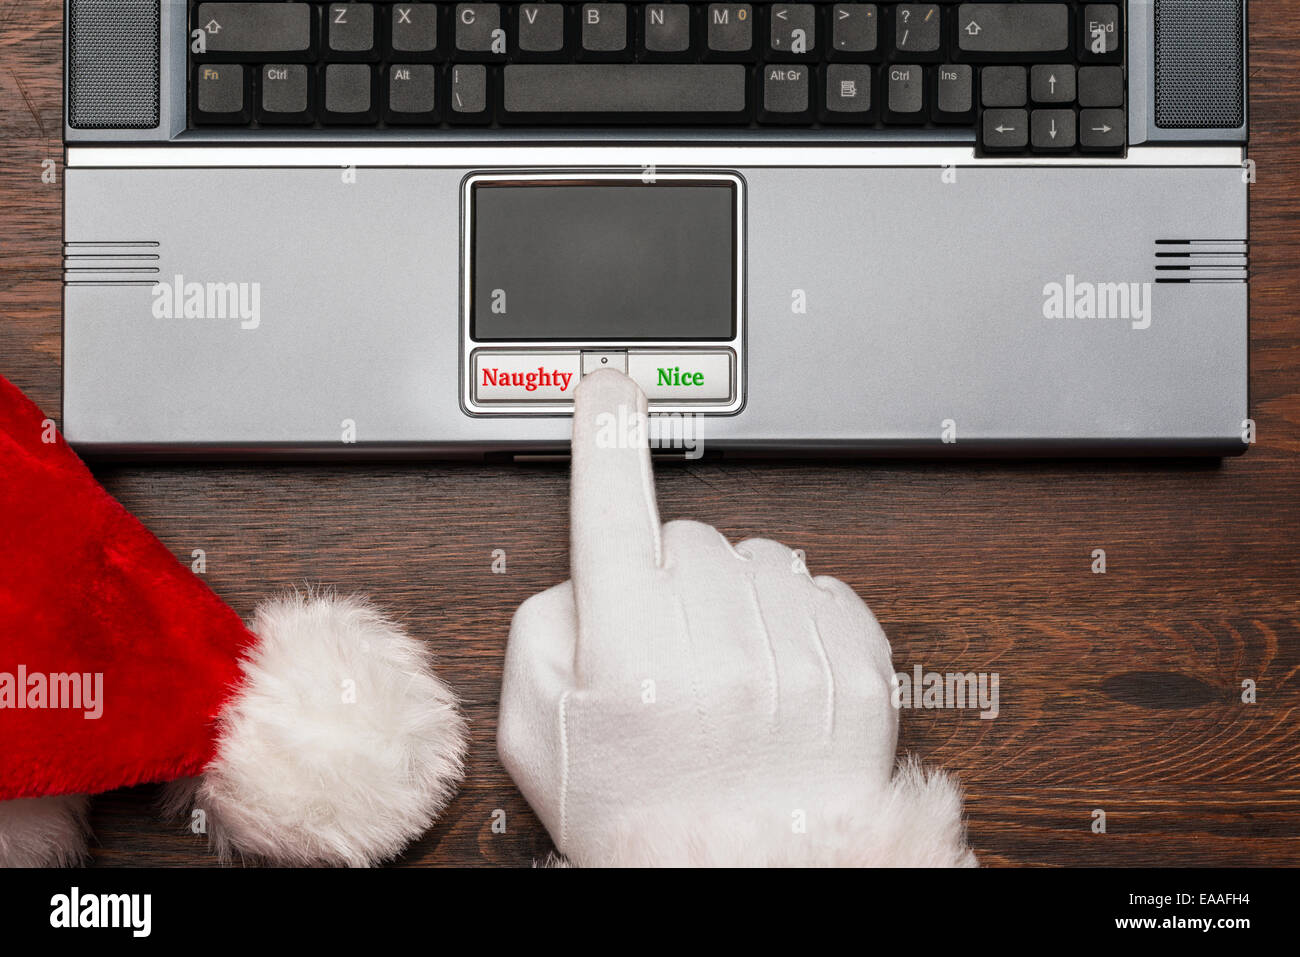 Father Christmas or Santa checking his list on a computer to select if a boy or girl is either Naughty or Nice. Stock Photo